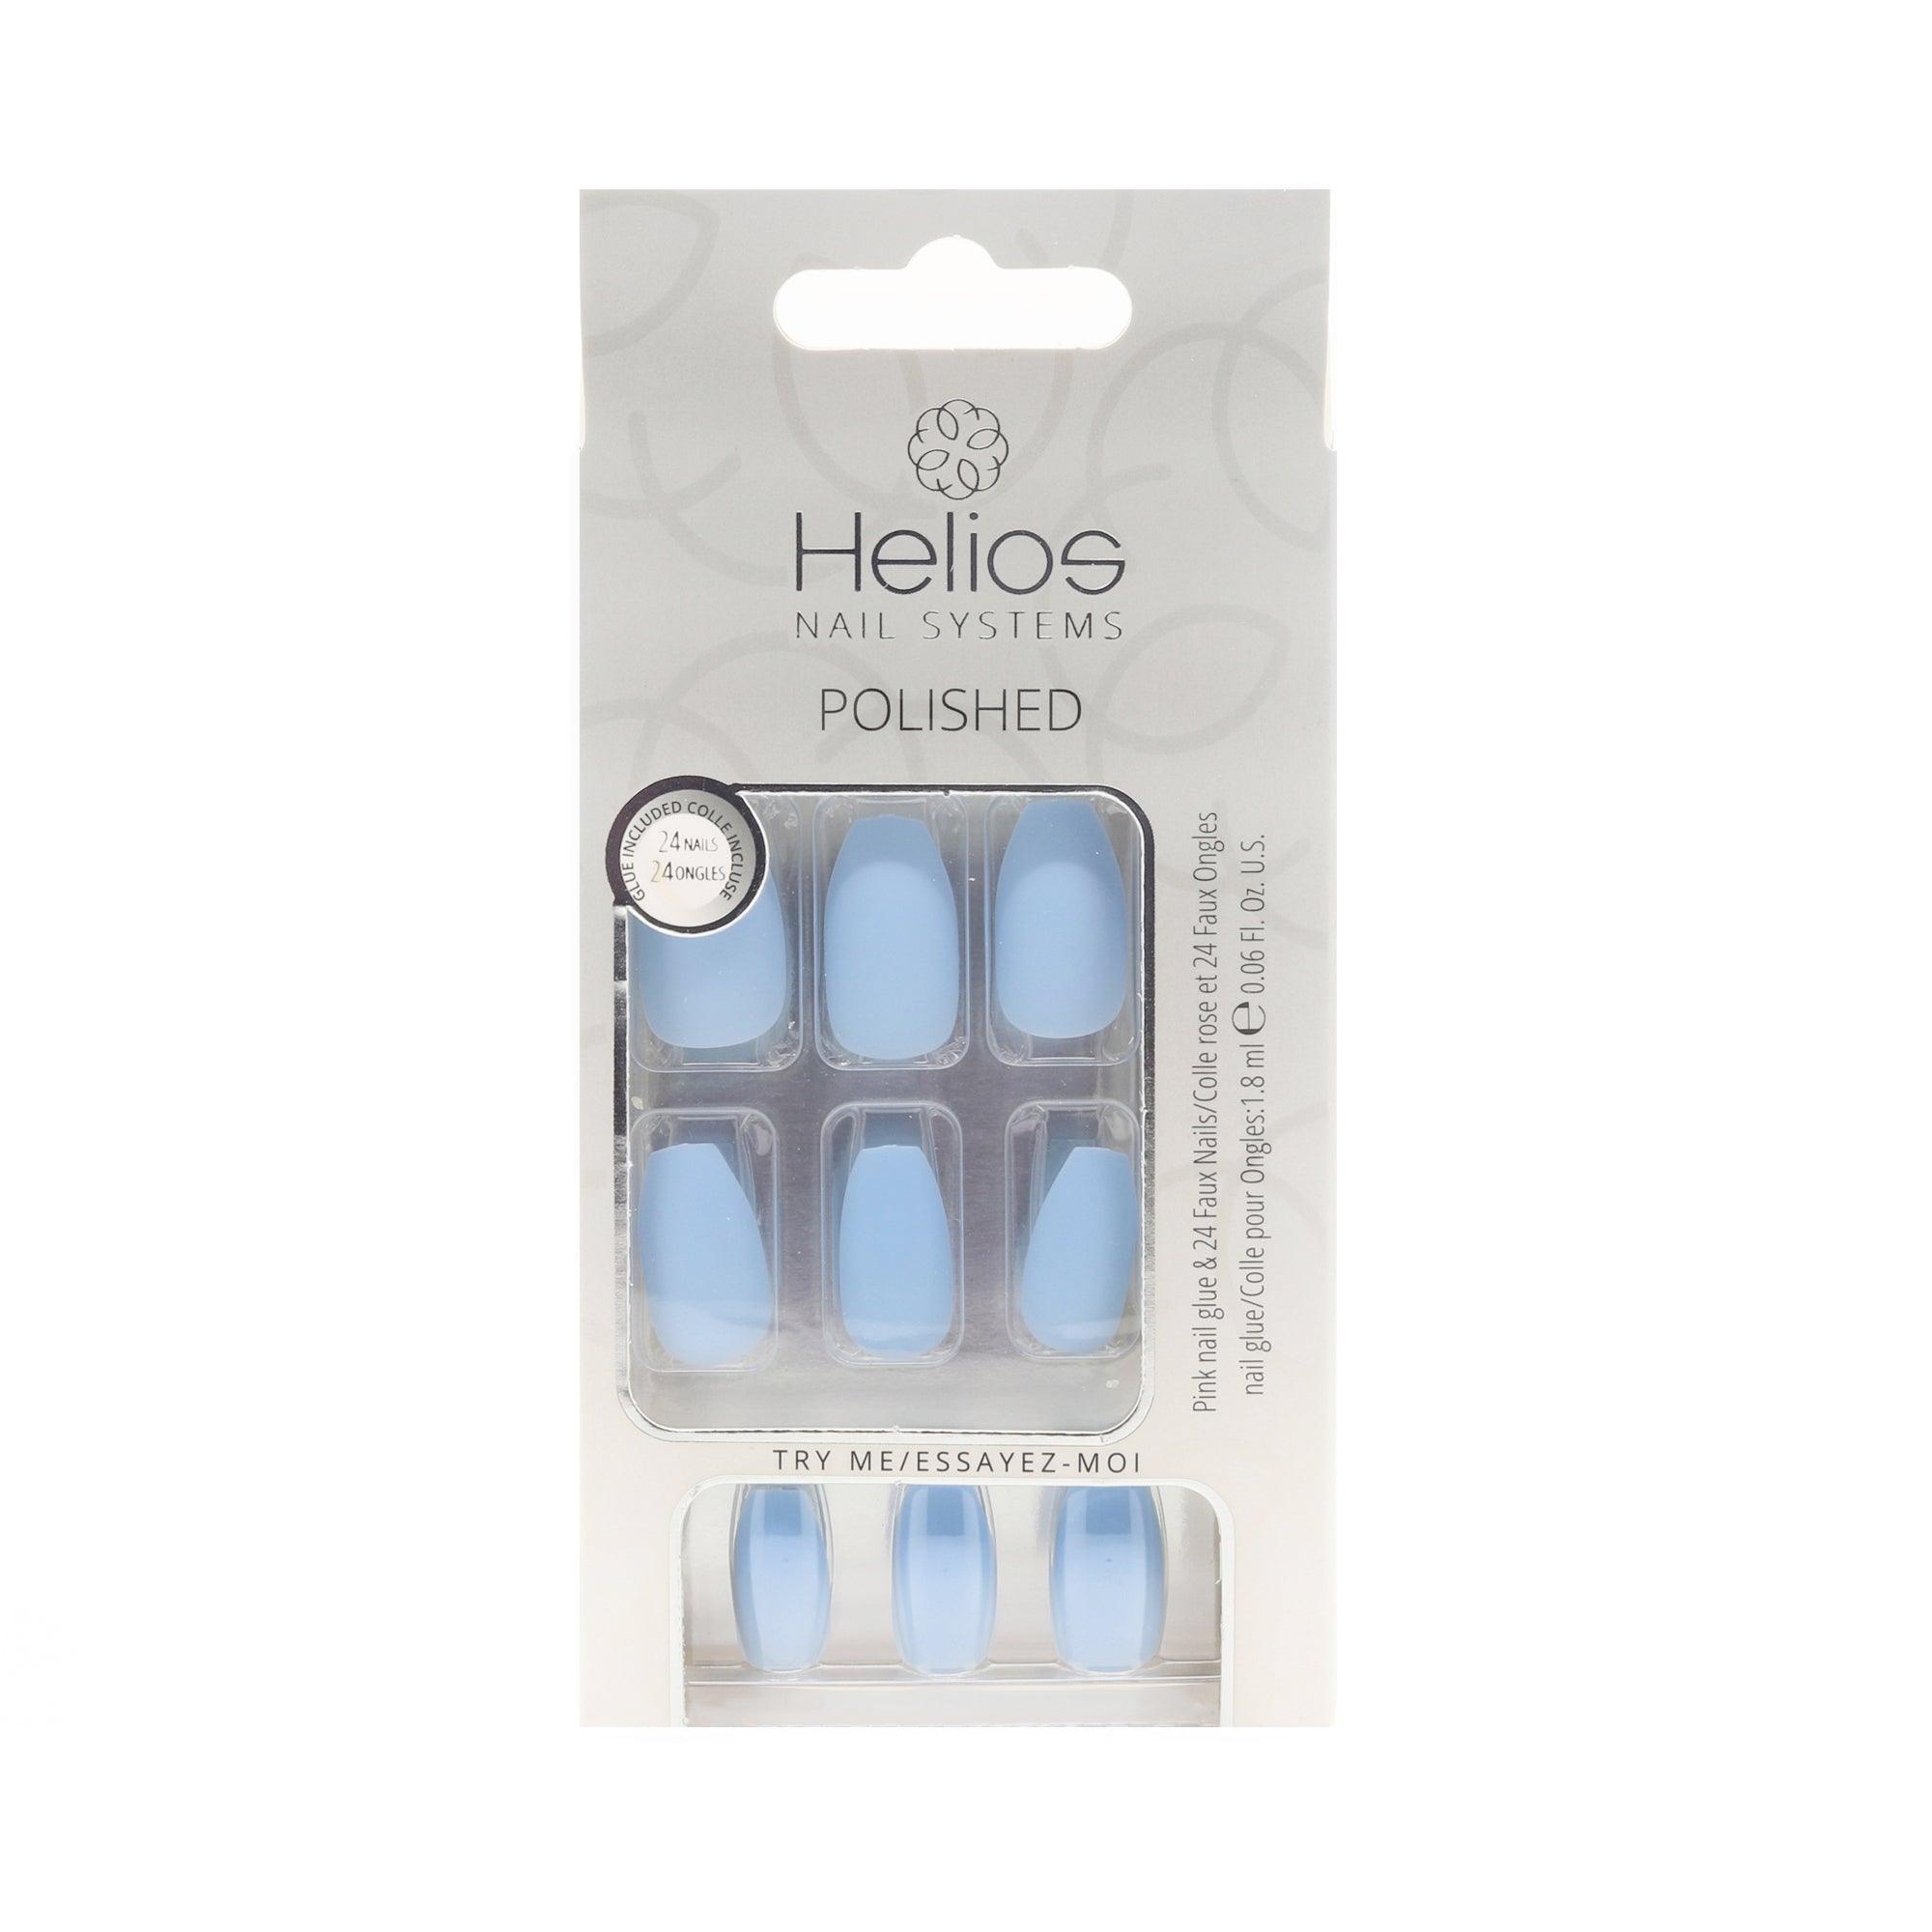 POLISHED ARTIFICIAL NAILS – Helios Nail Systems